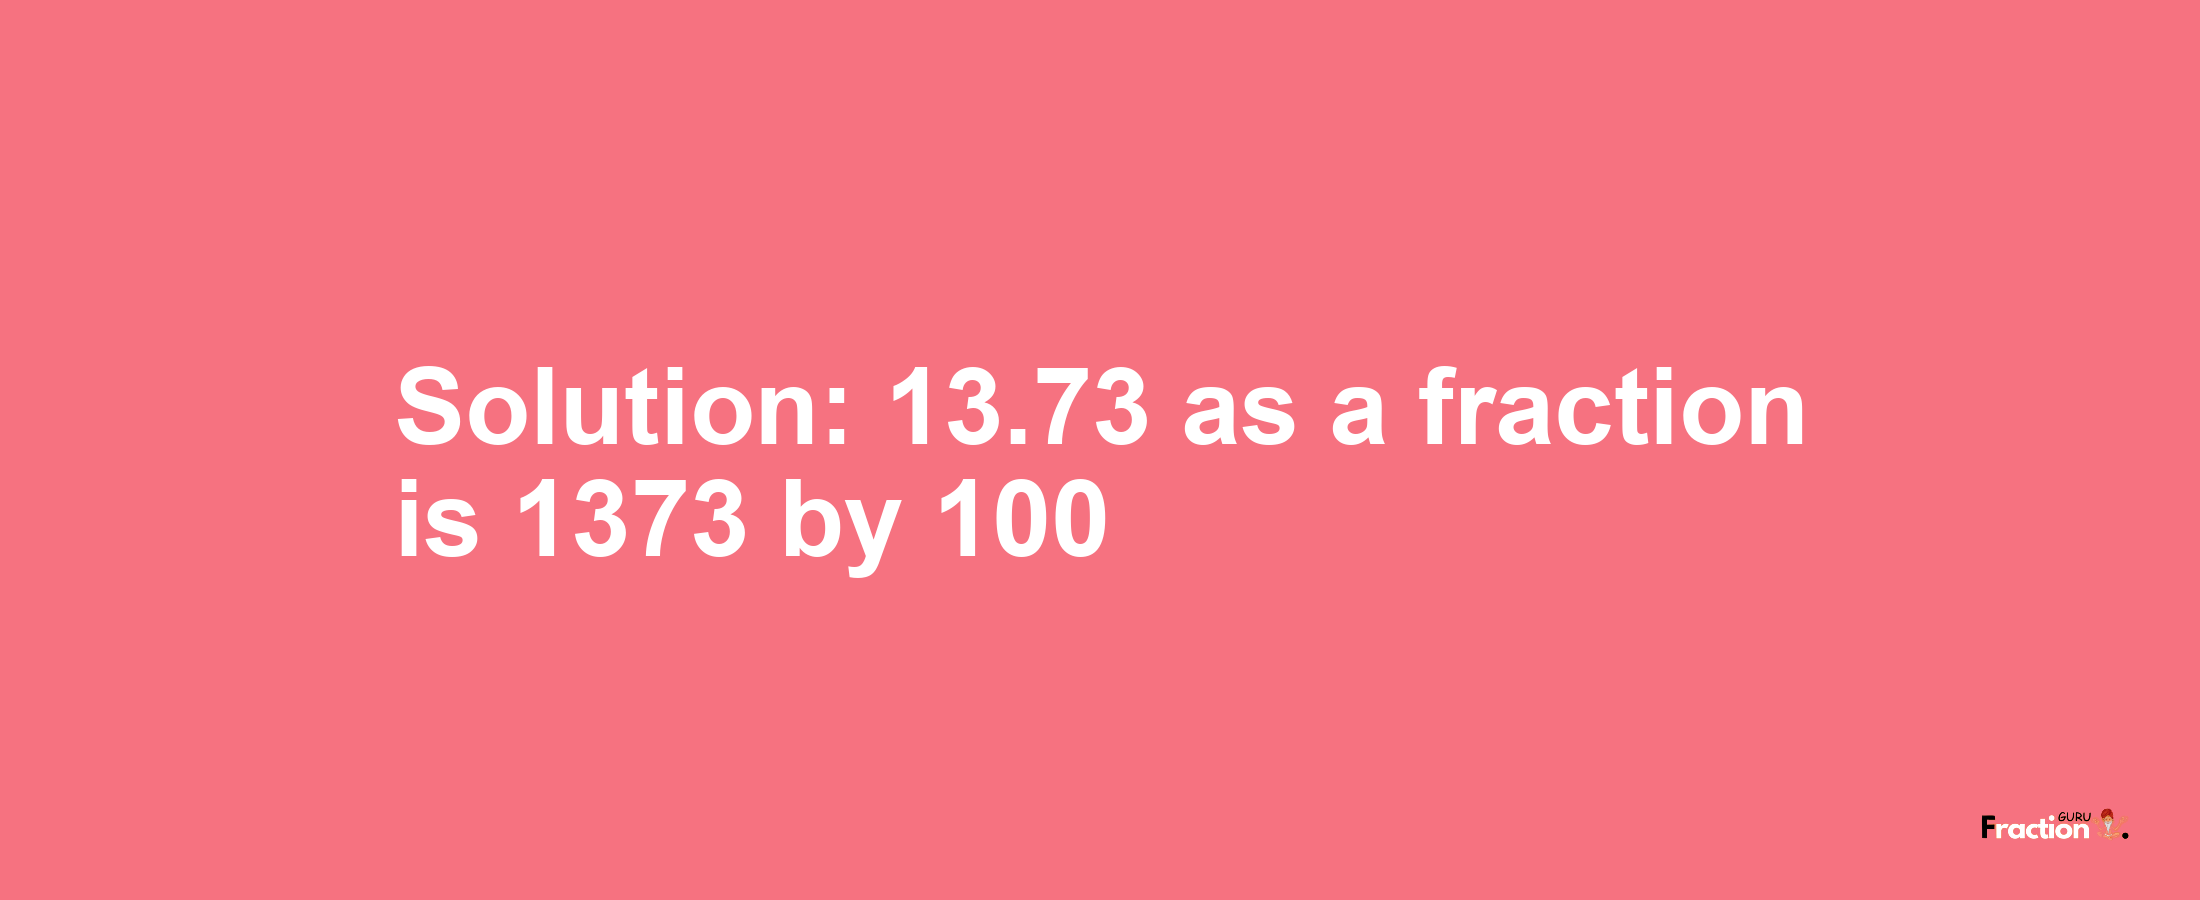 Solution:13.73 as a fraction is 1373/100